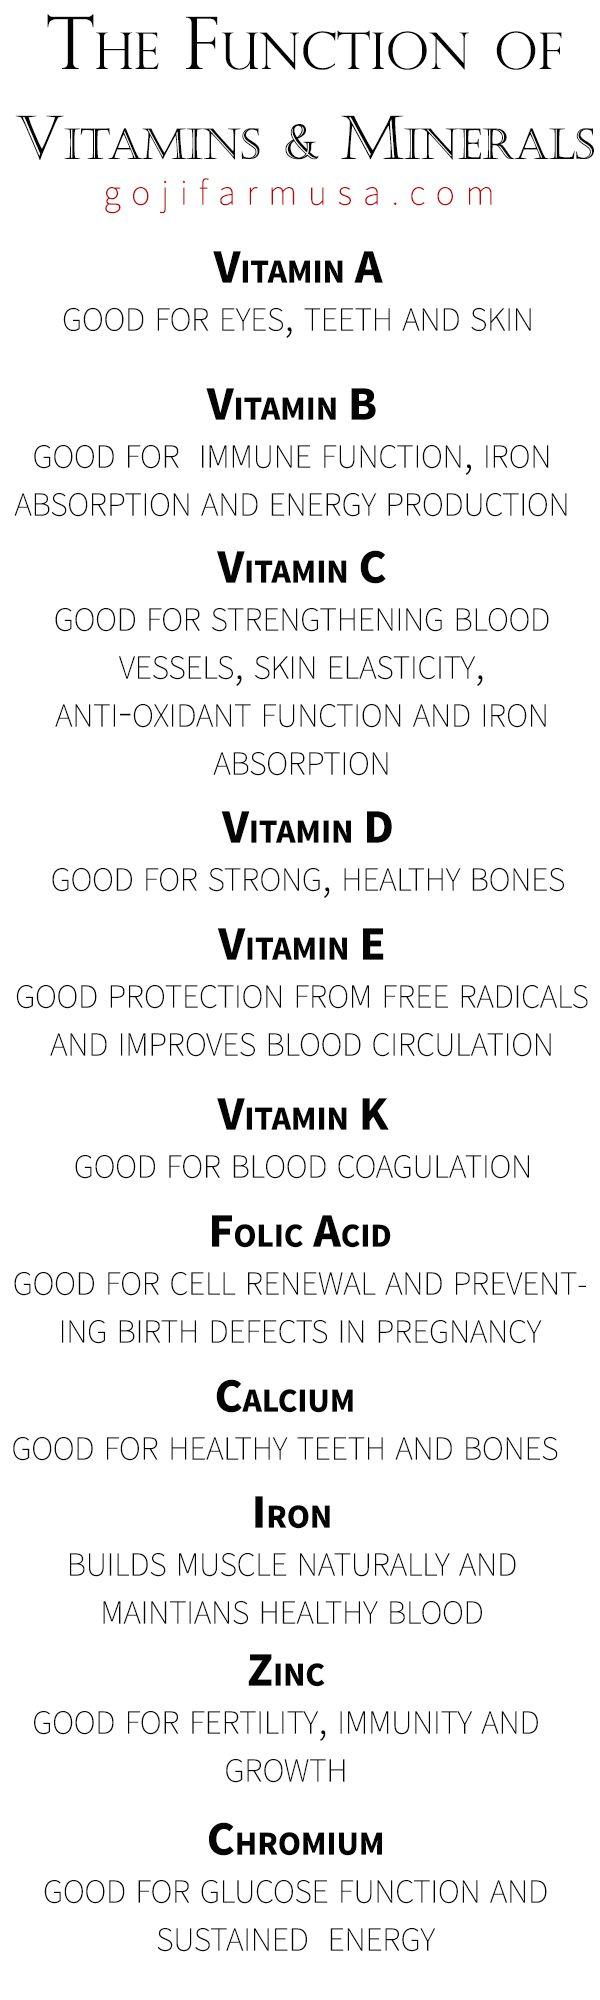 Wedding - The Function Of Vitamins And Minerals